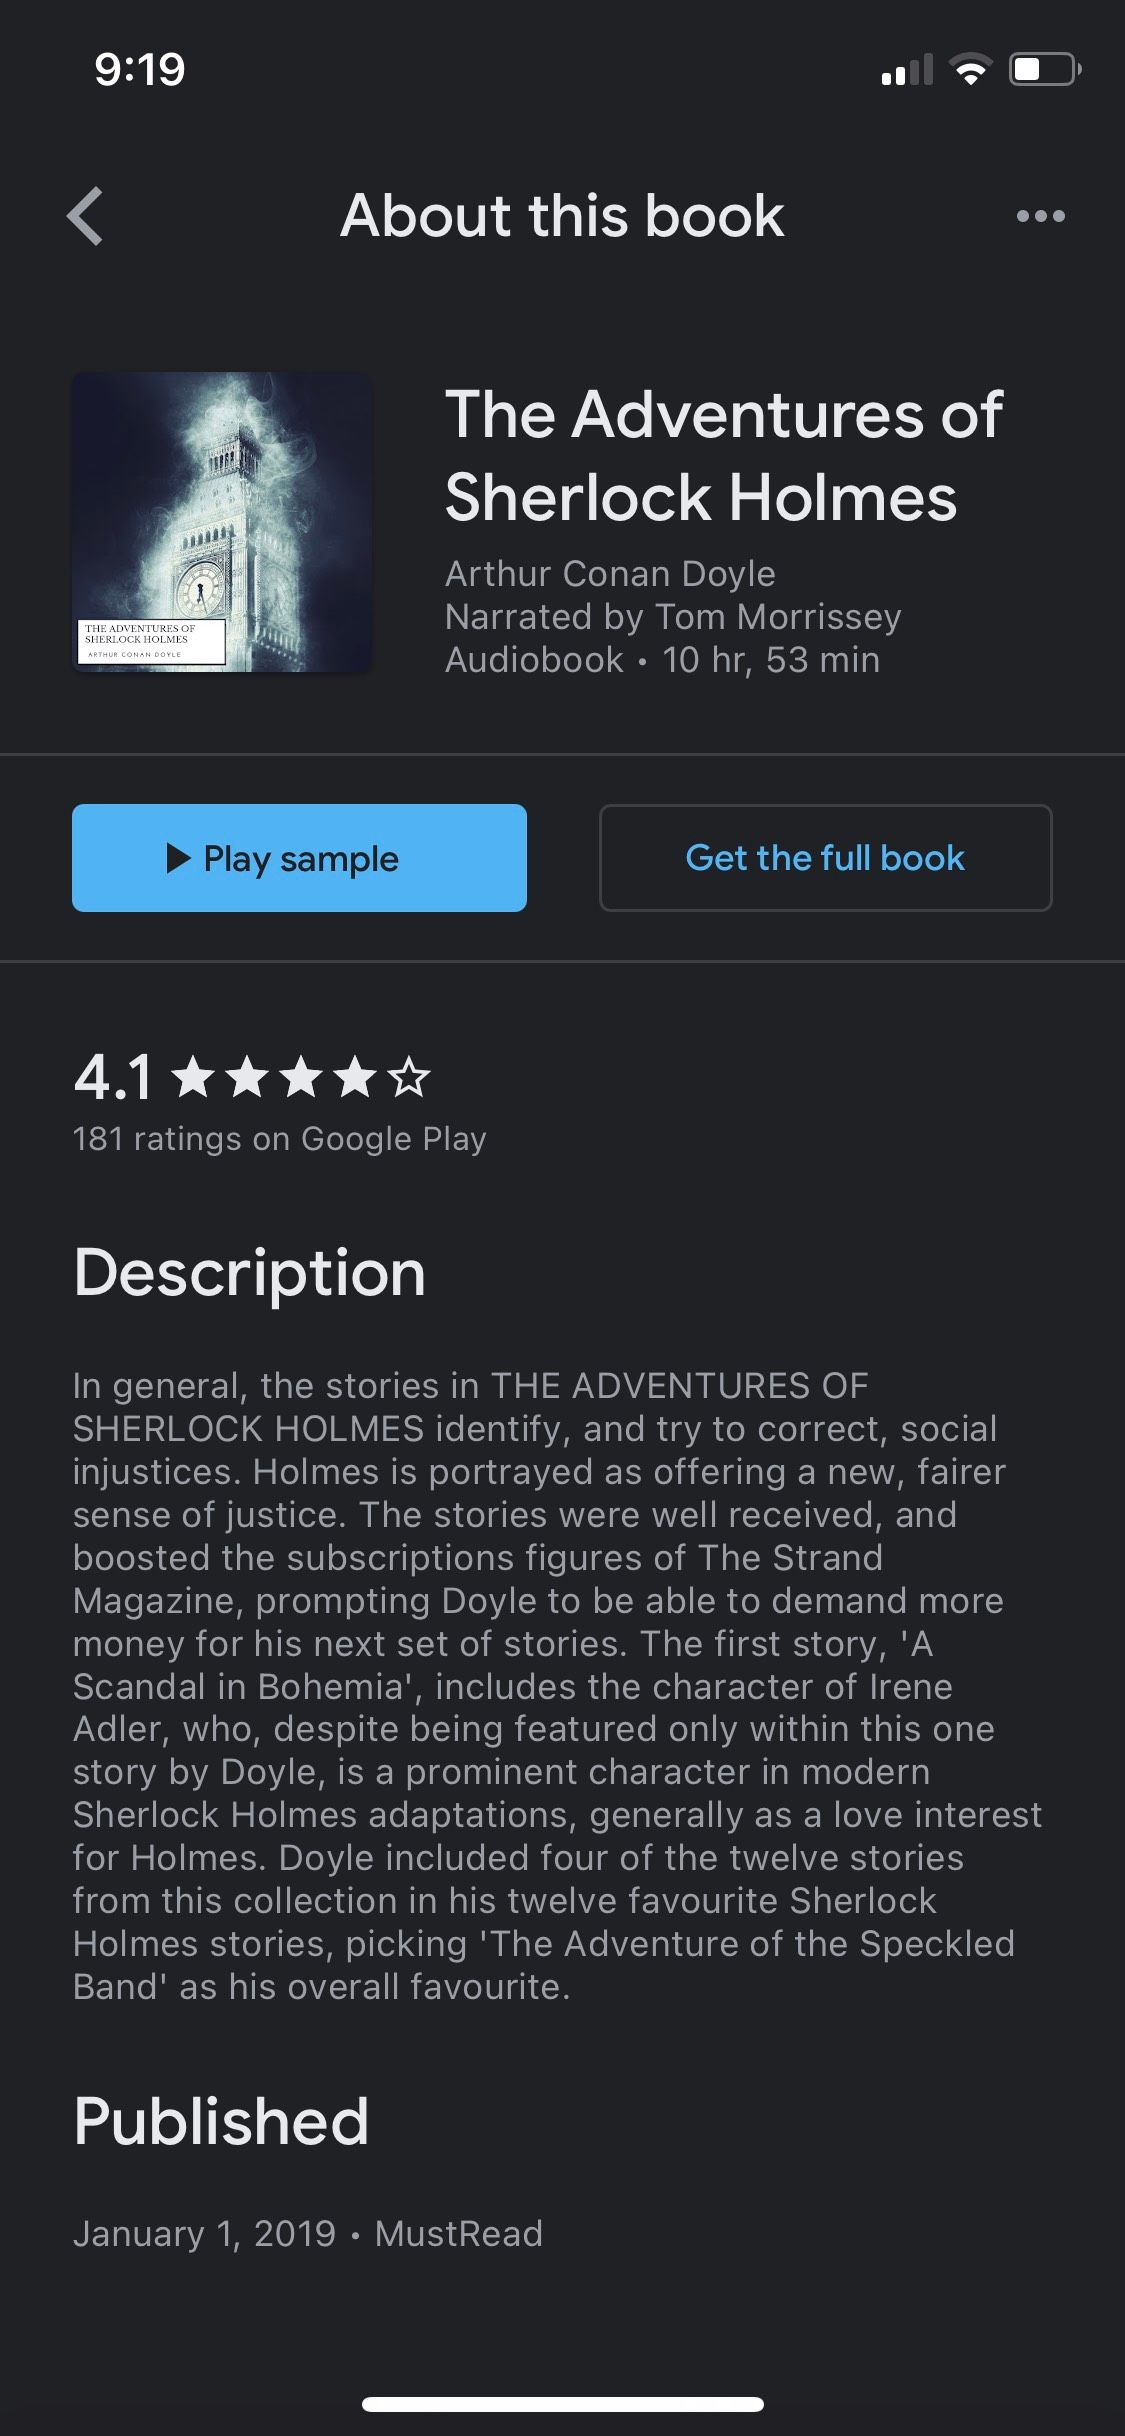 Google Play Books app about book app